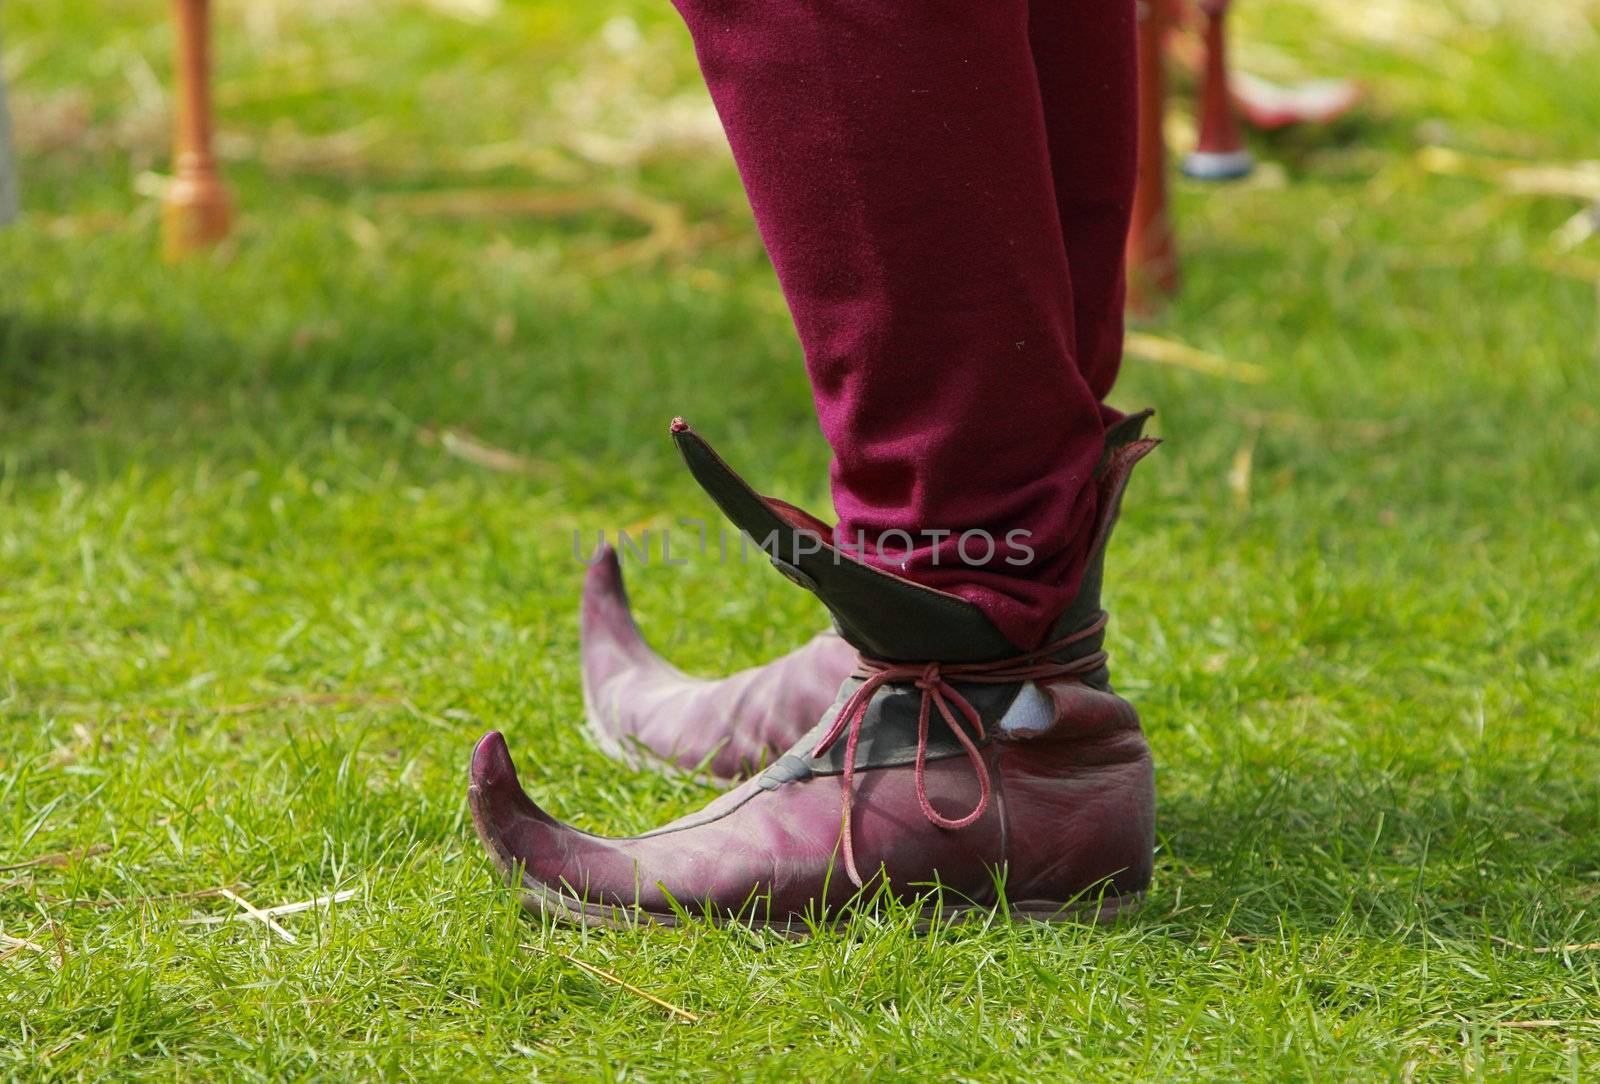 Medieval European Long Toed Shoes by RazvanPhotography